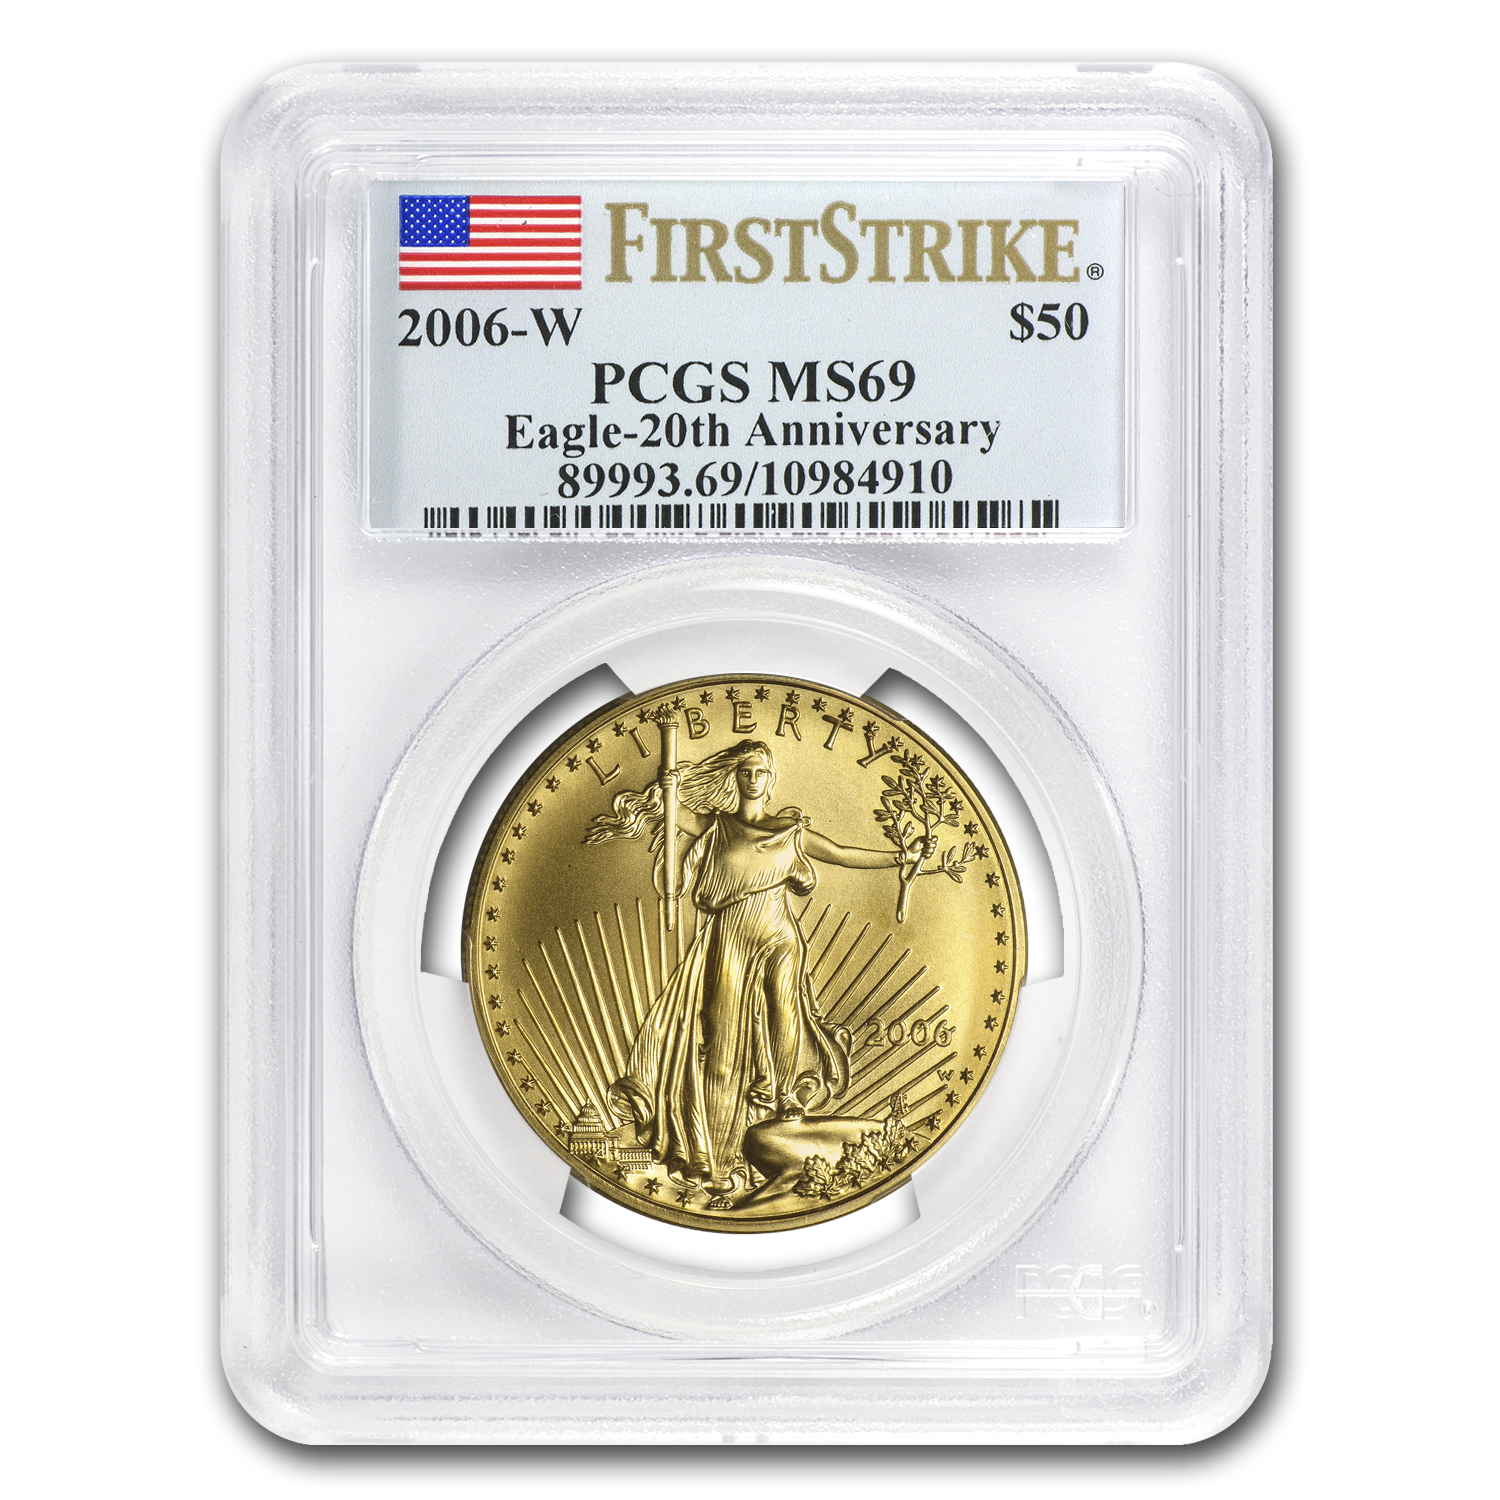 Buy 2006-W 1 oz Burnished Gold Eagle SP/MS-69 PCGS (FirstStrike?)